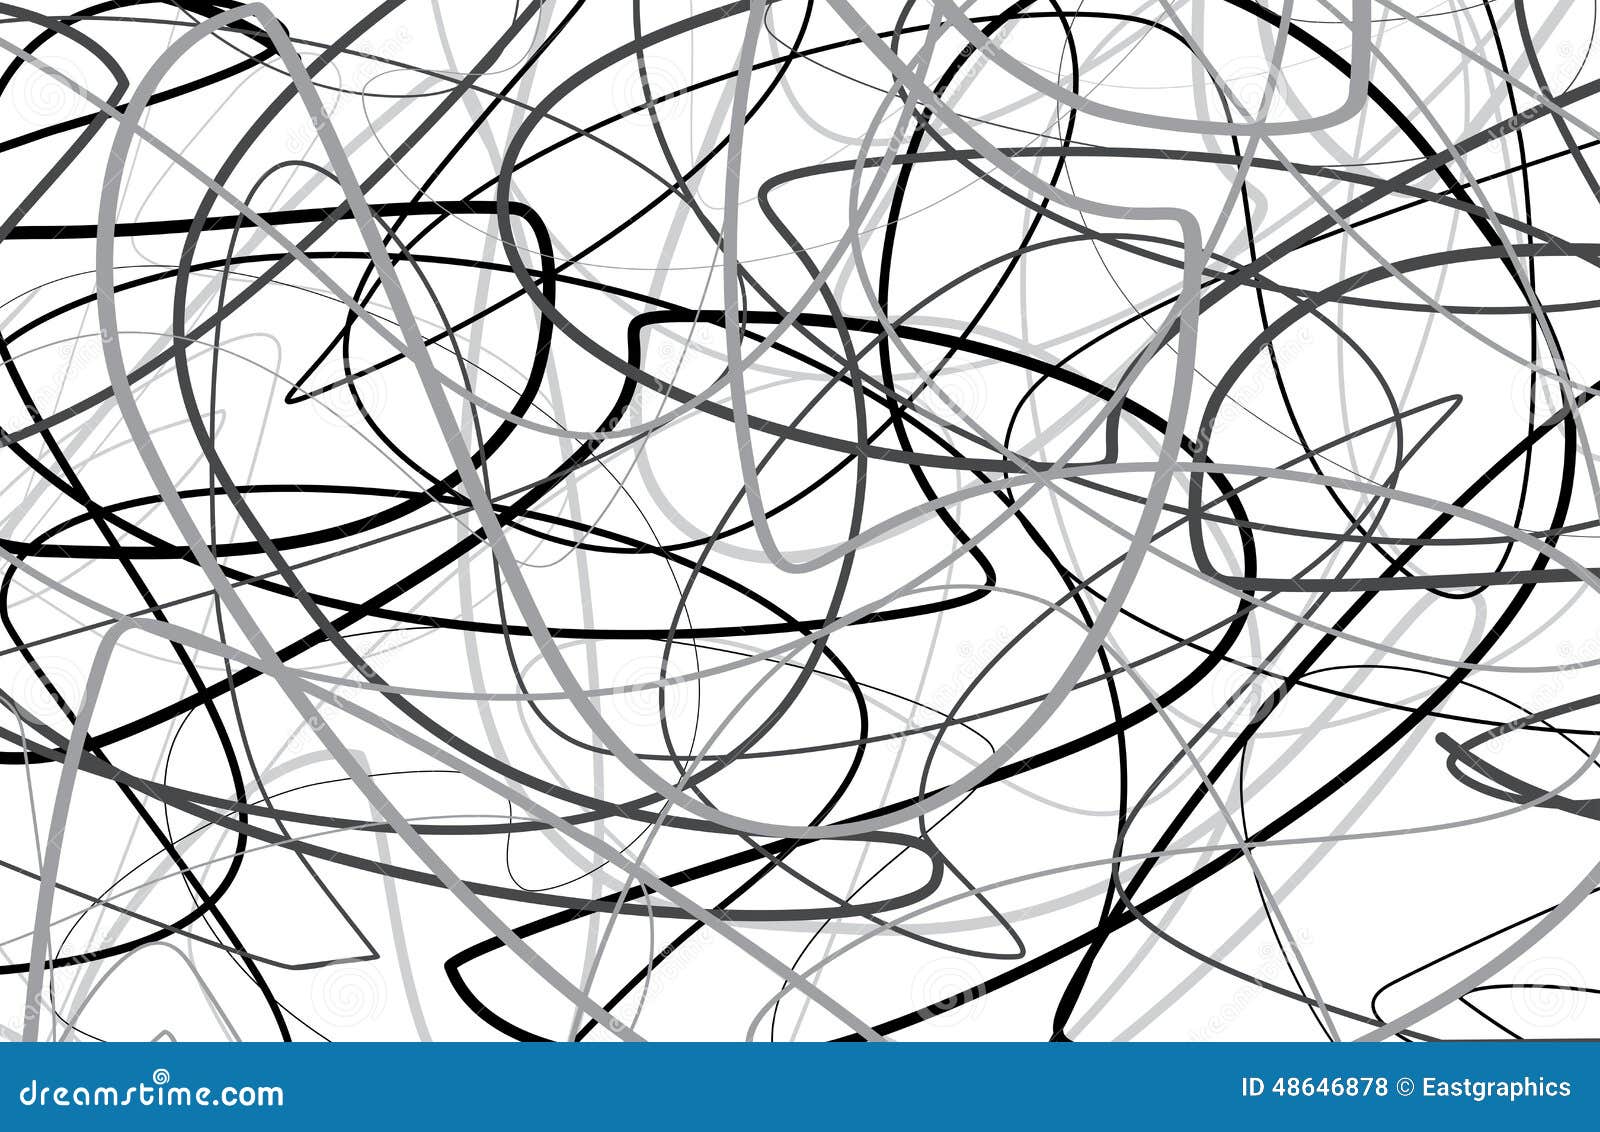 scribble black and white background